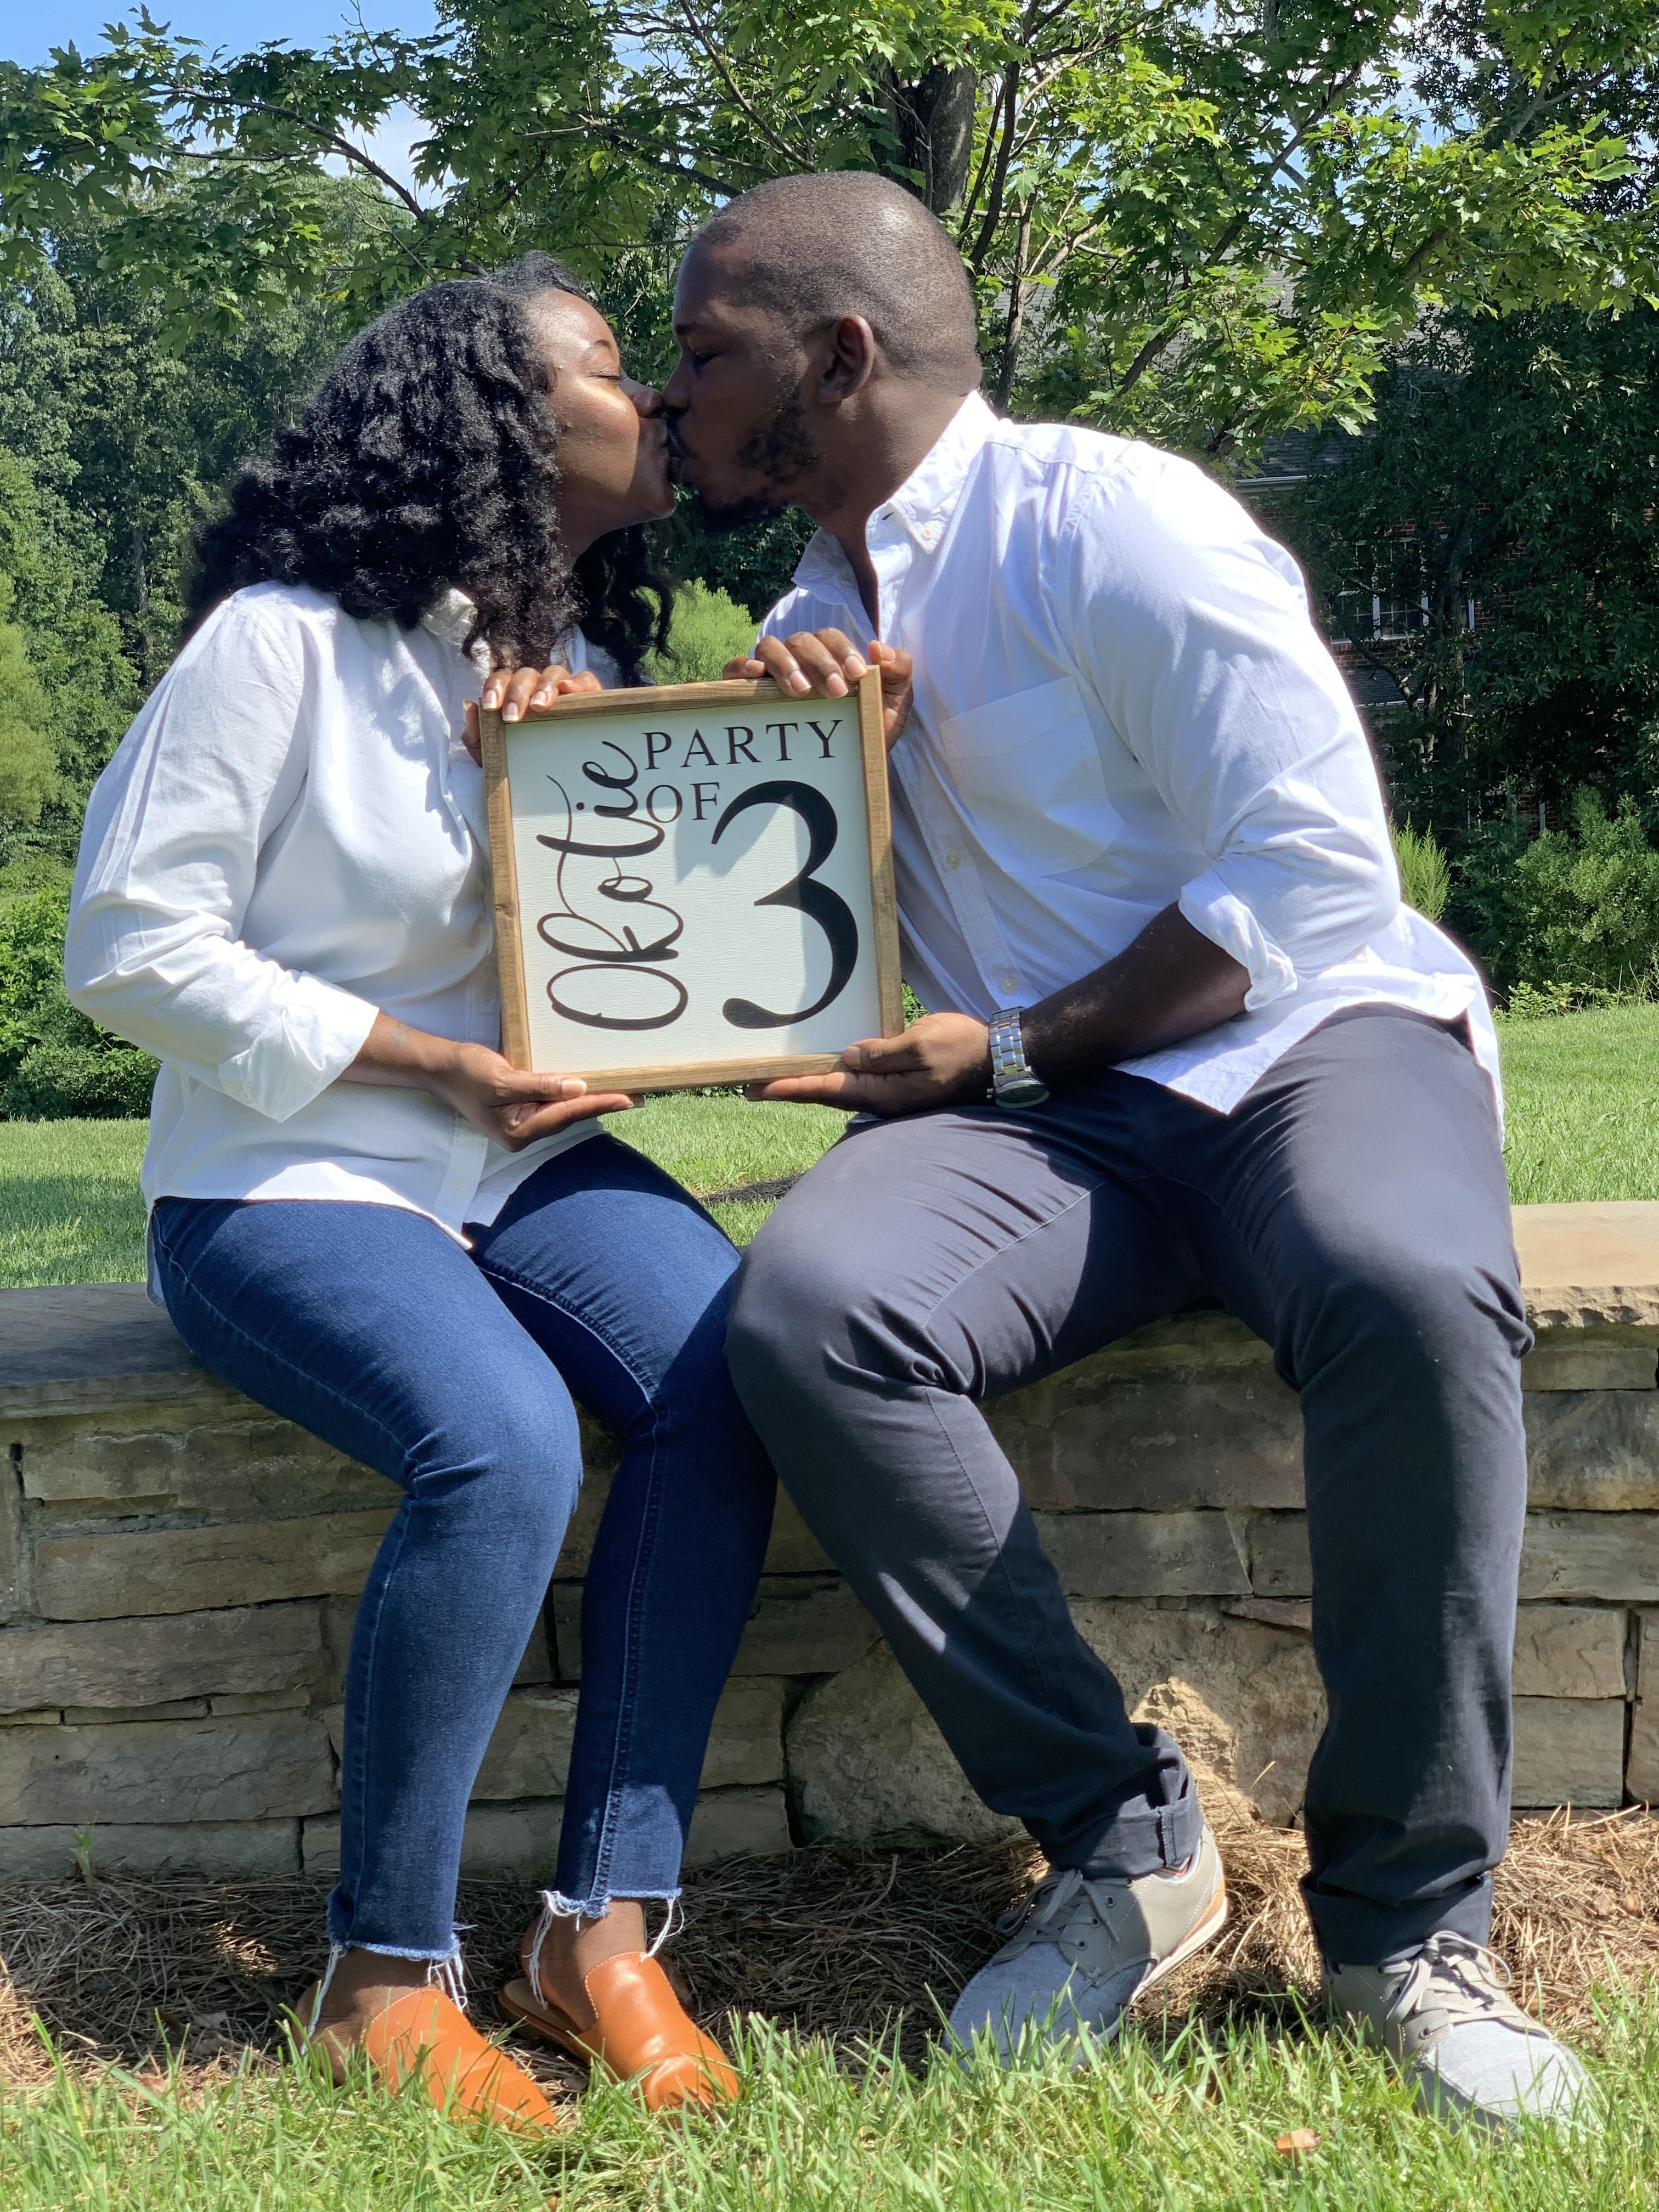 Greg and Deonna Pregnancy announcement